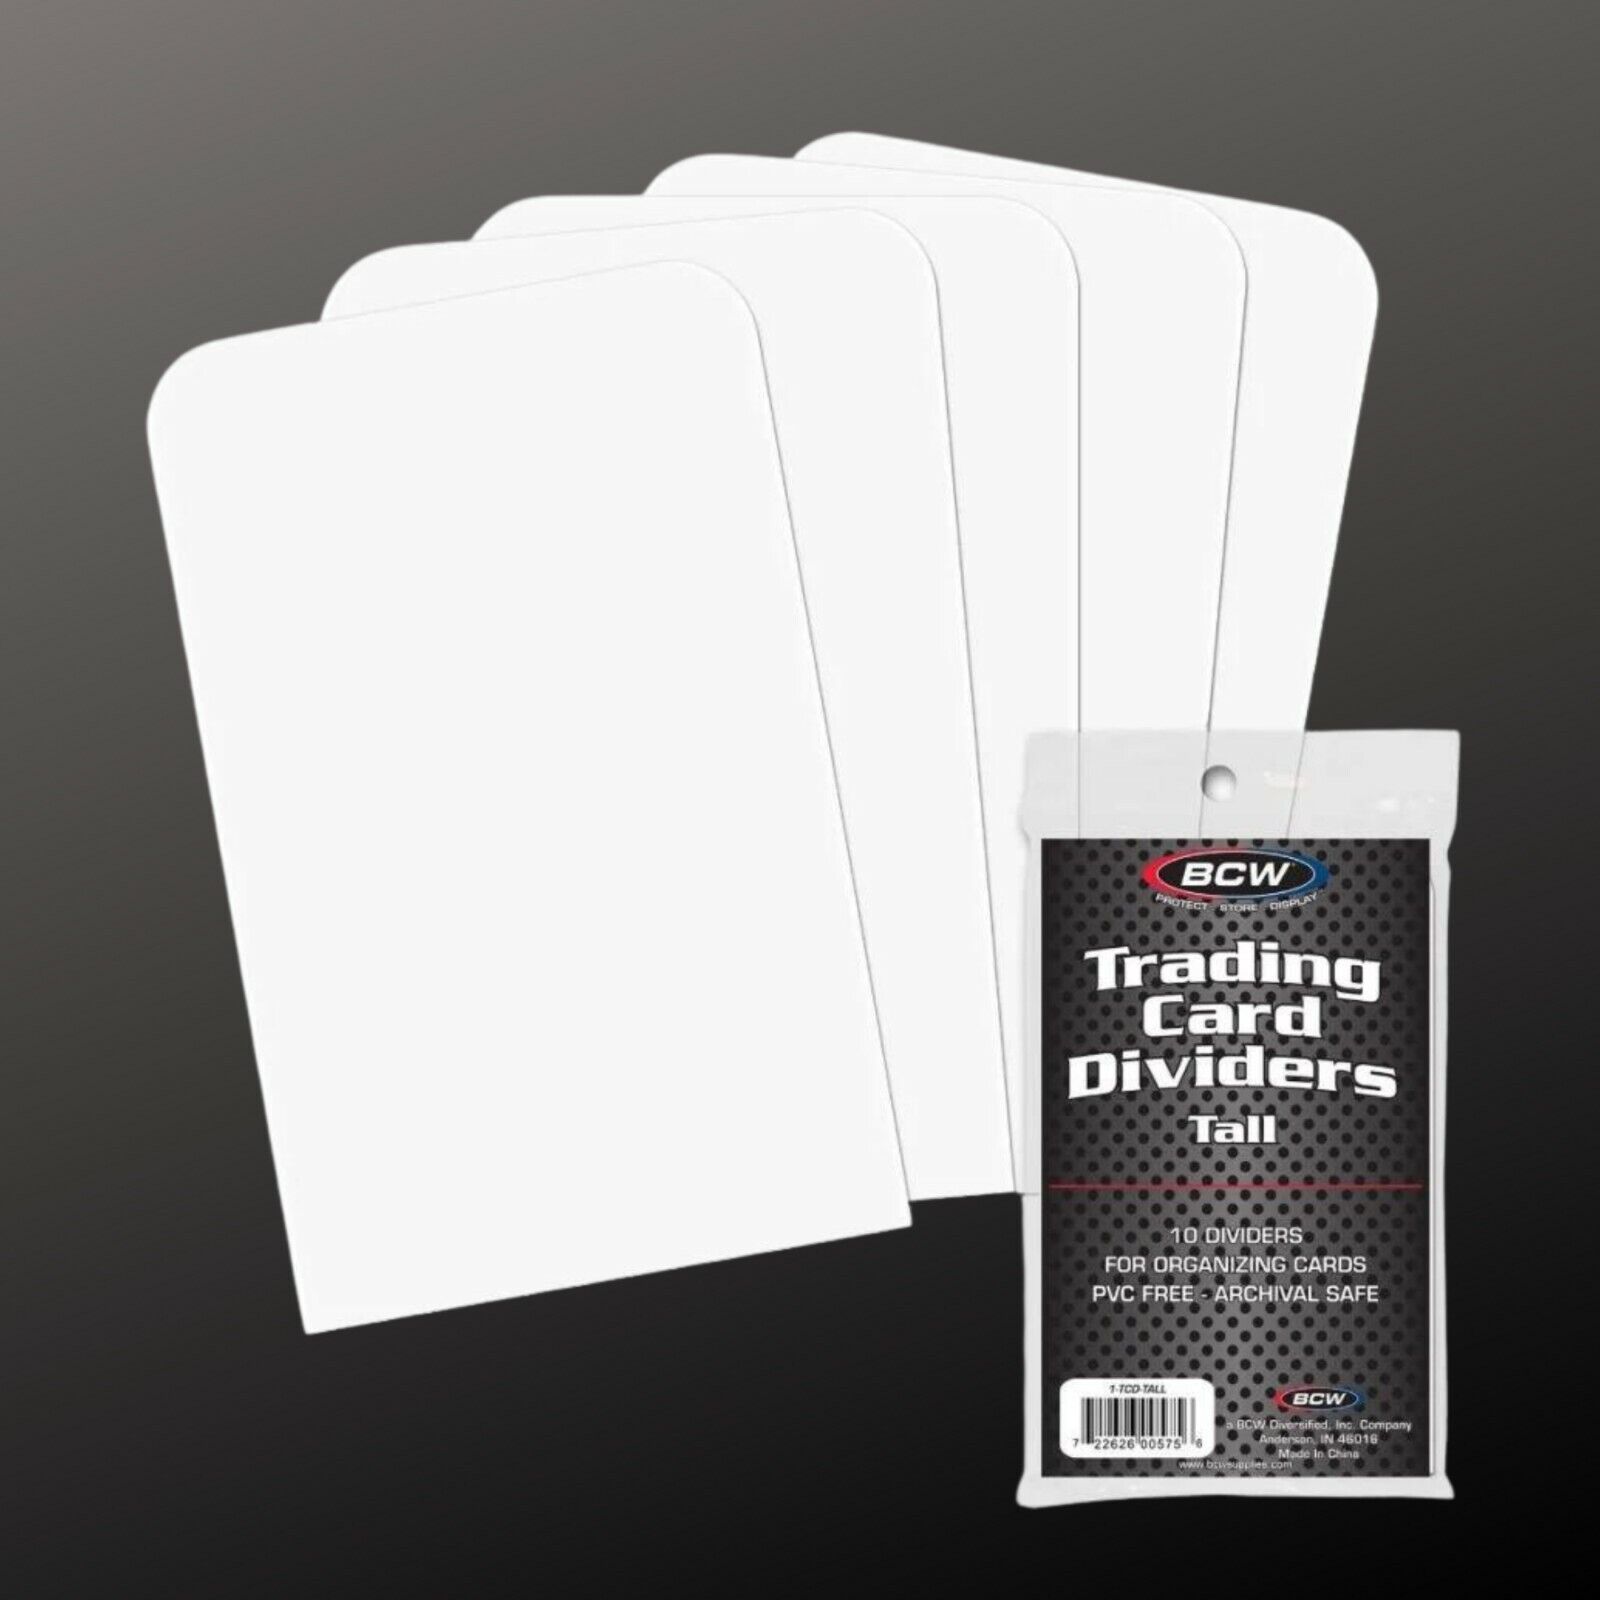 BCW TALL Trading Card Dividers (5 Packs of 10) - Brand New, Fits Above Toploader